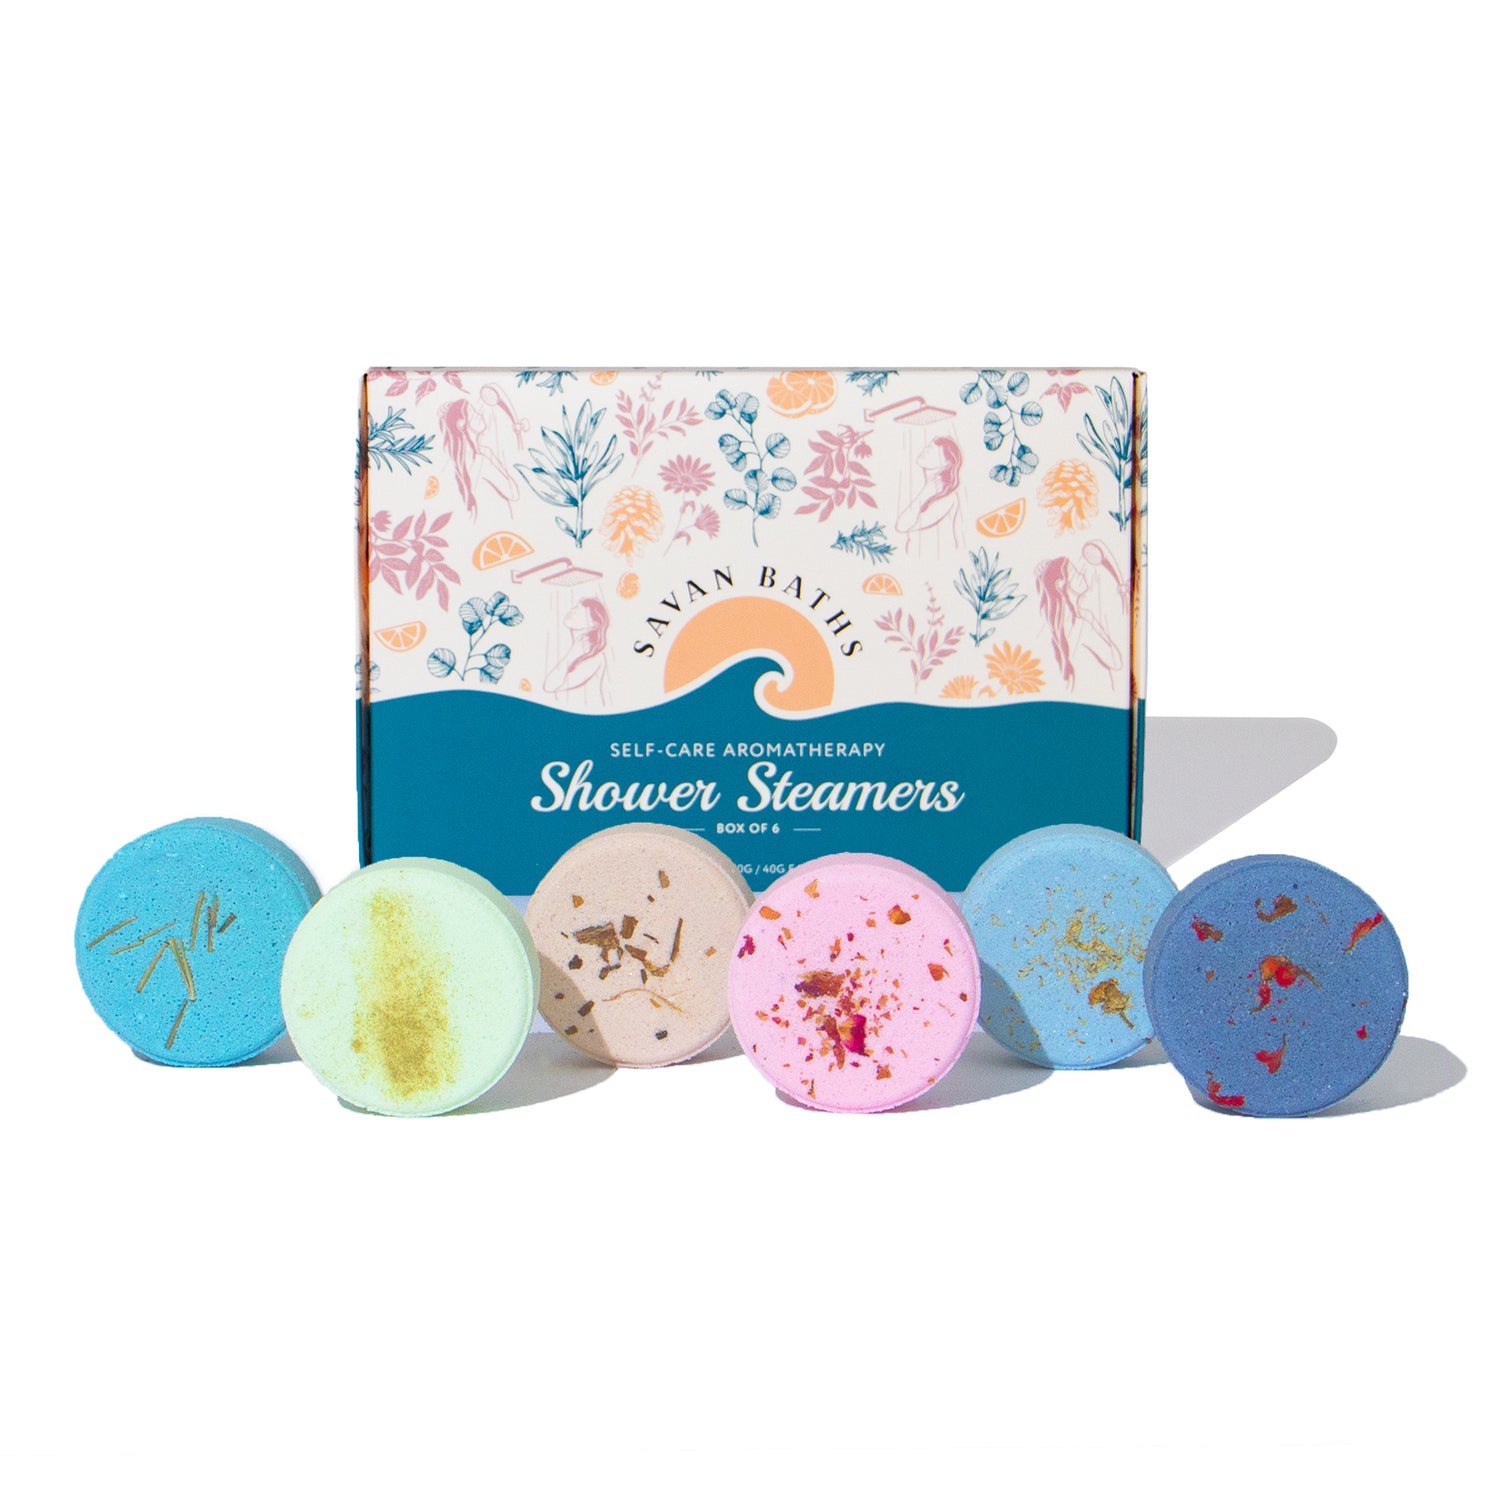 LUXE Shower Steamers Gift Set